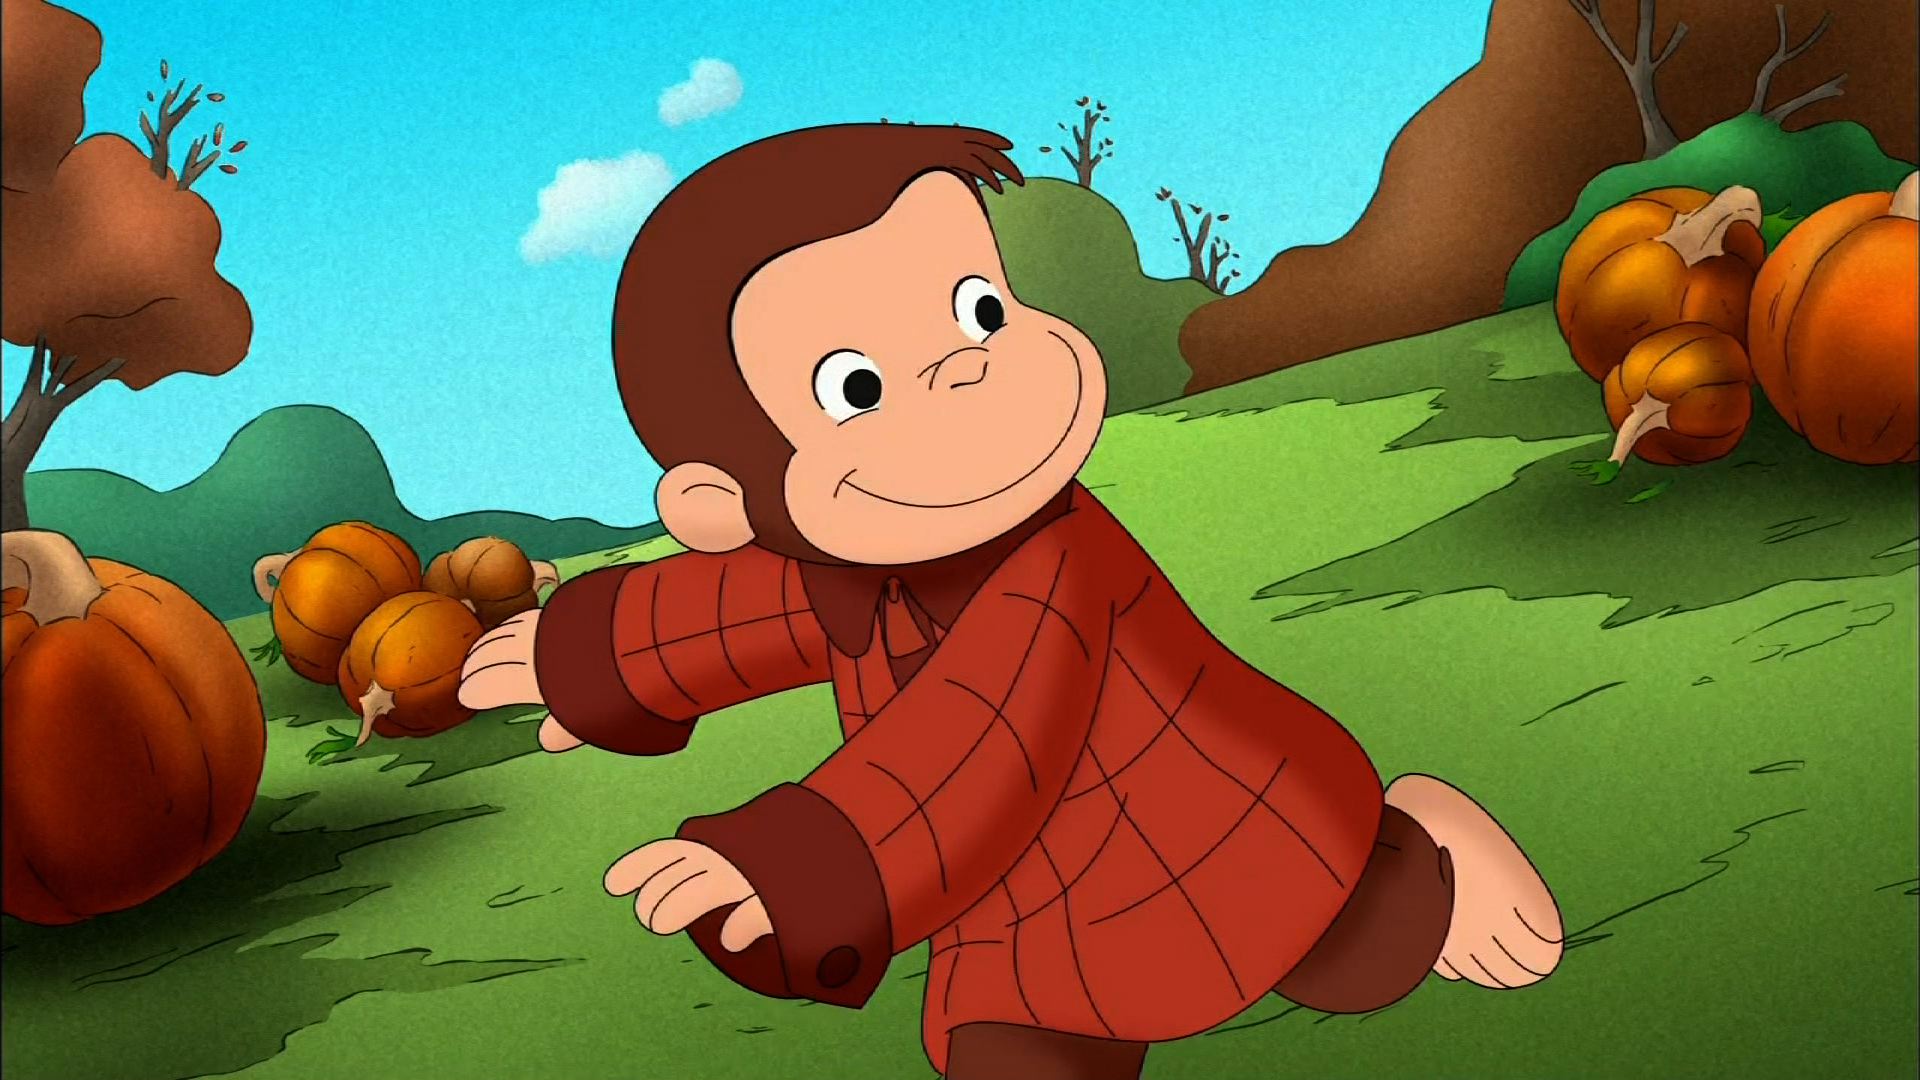 Best 51 Curious George Wallpaper on HipWallpaper Curious George